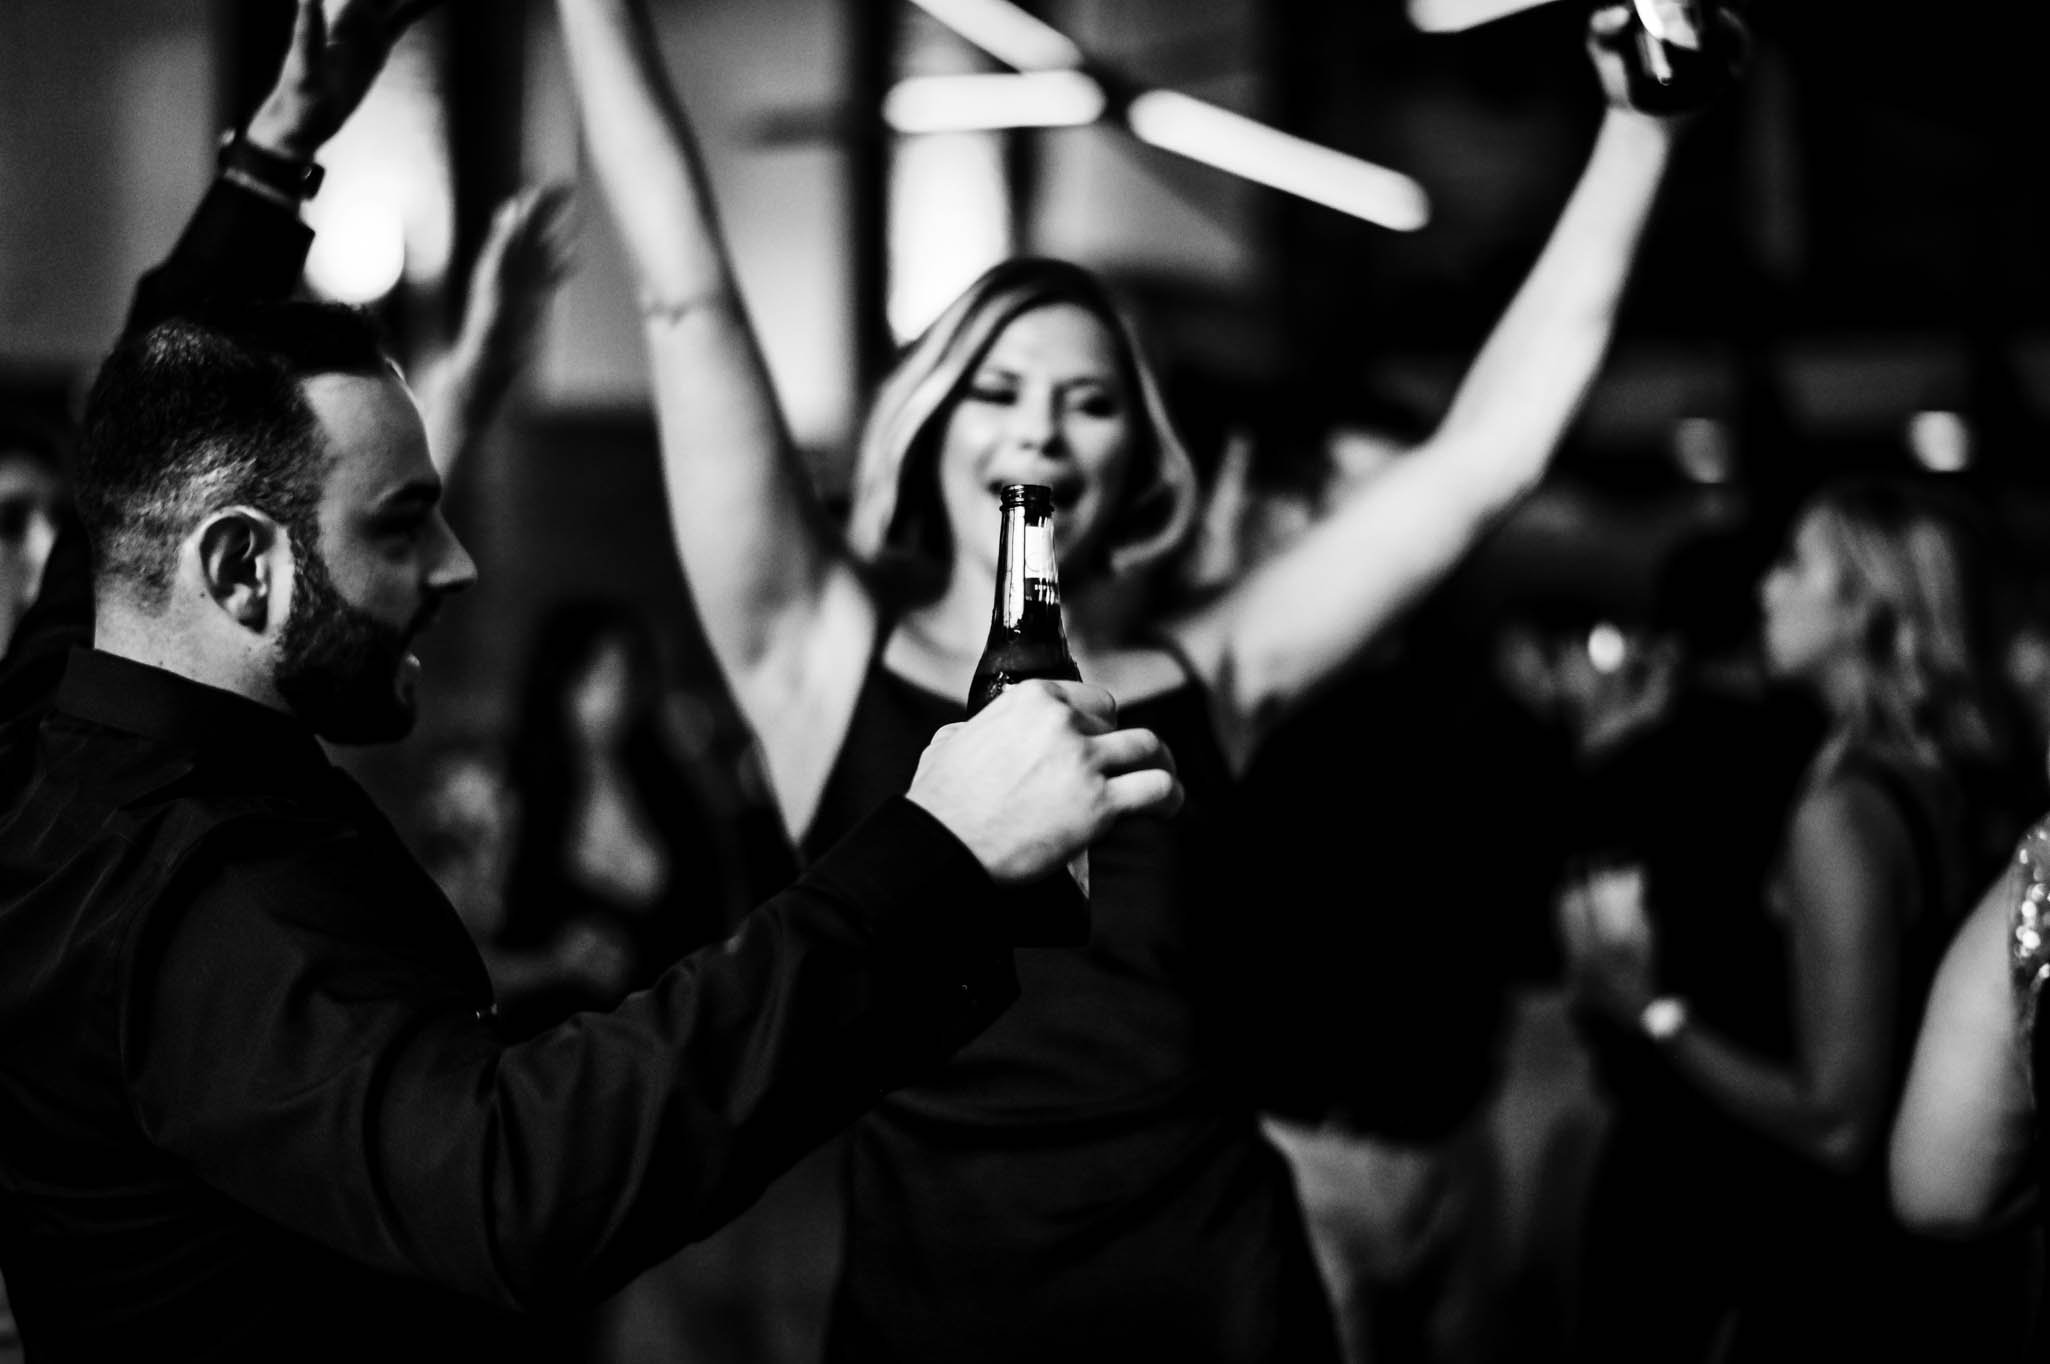 wedding guests sings as a beer bottle is lifted to cover her mouth